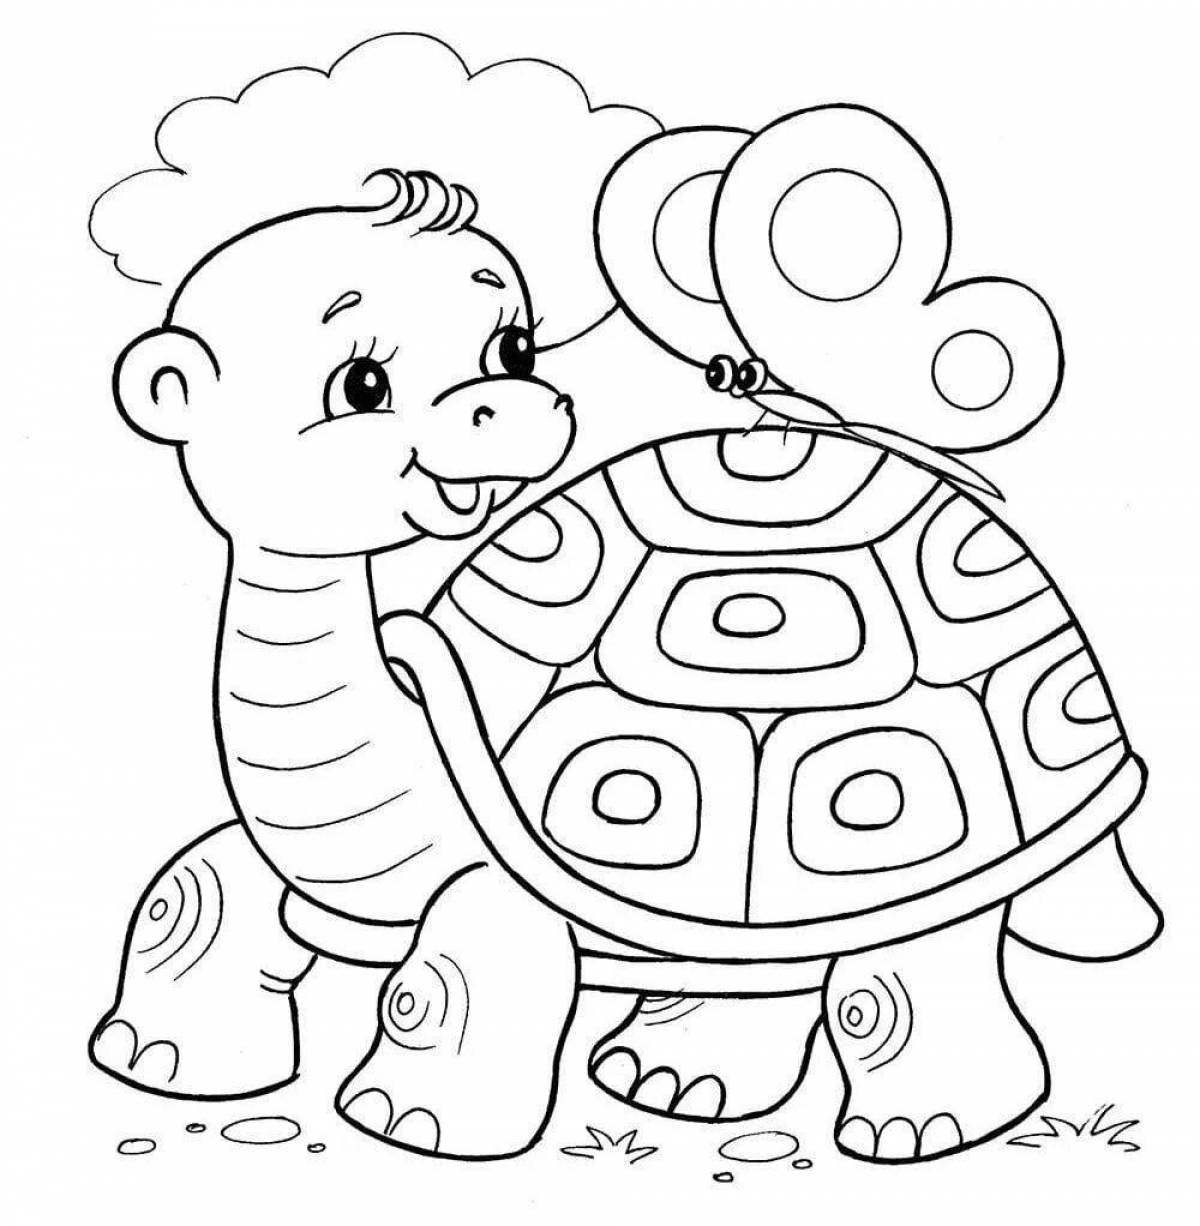 Color-joyful coloring page coloring book for children